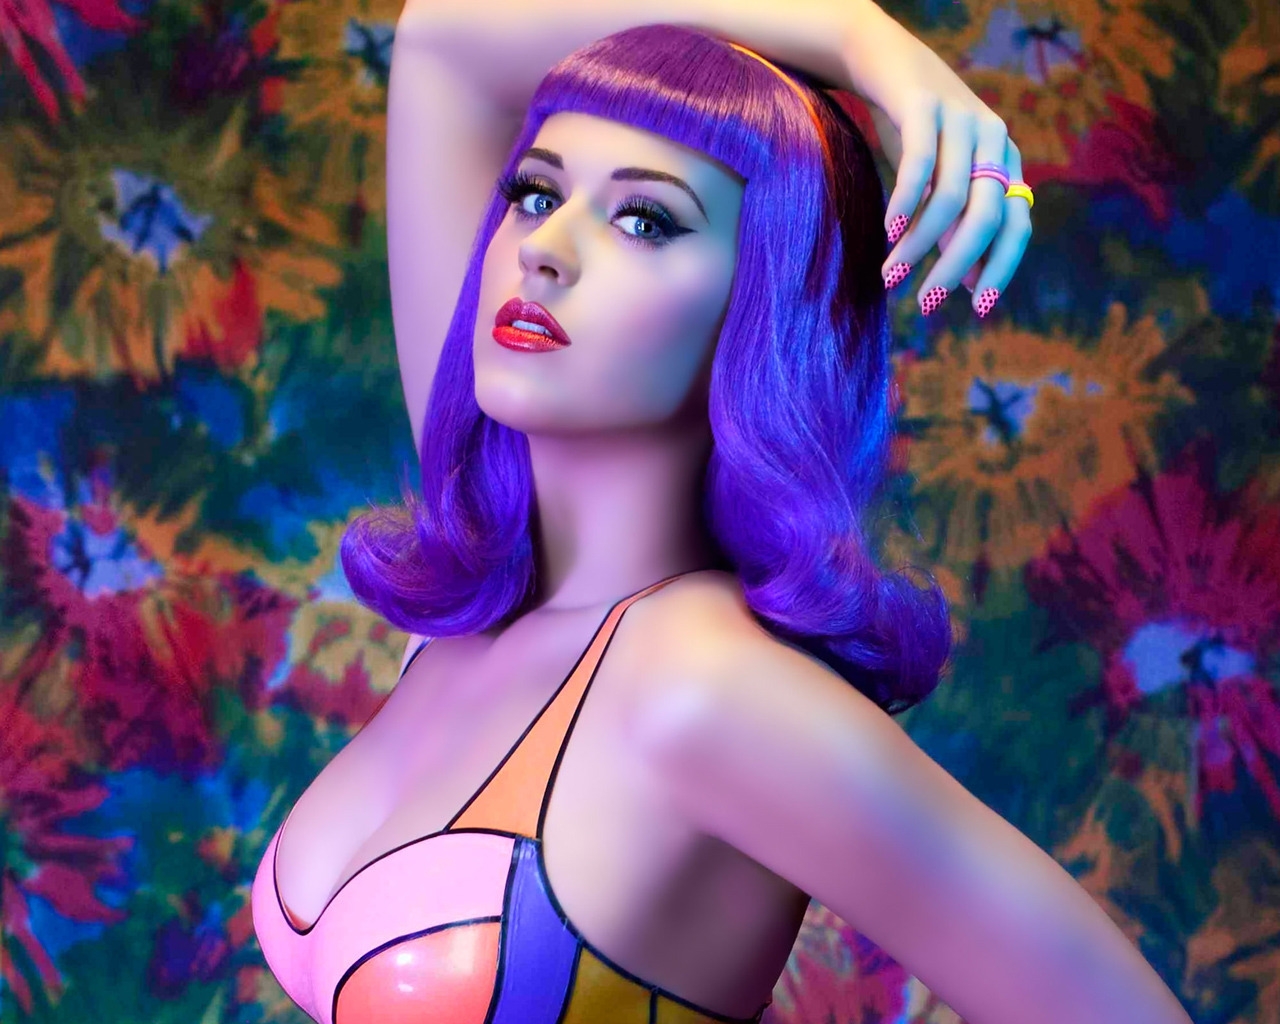 Colourful Katy Perry for 1280 x 1024 resolution